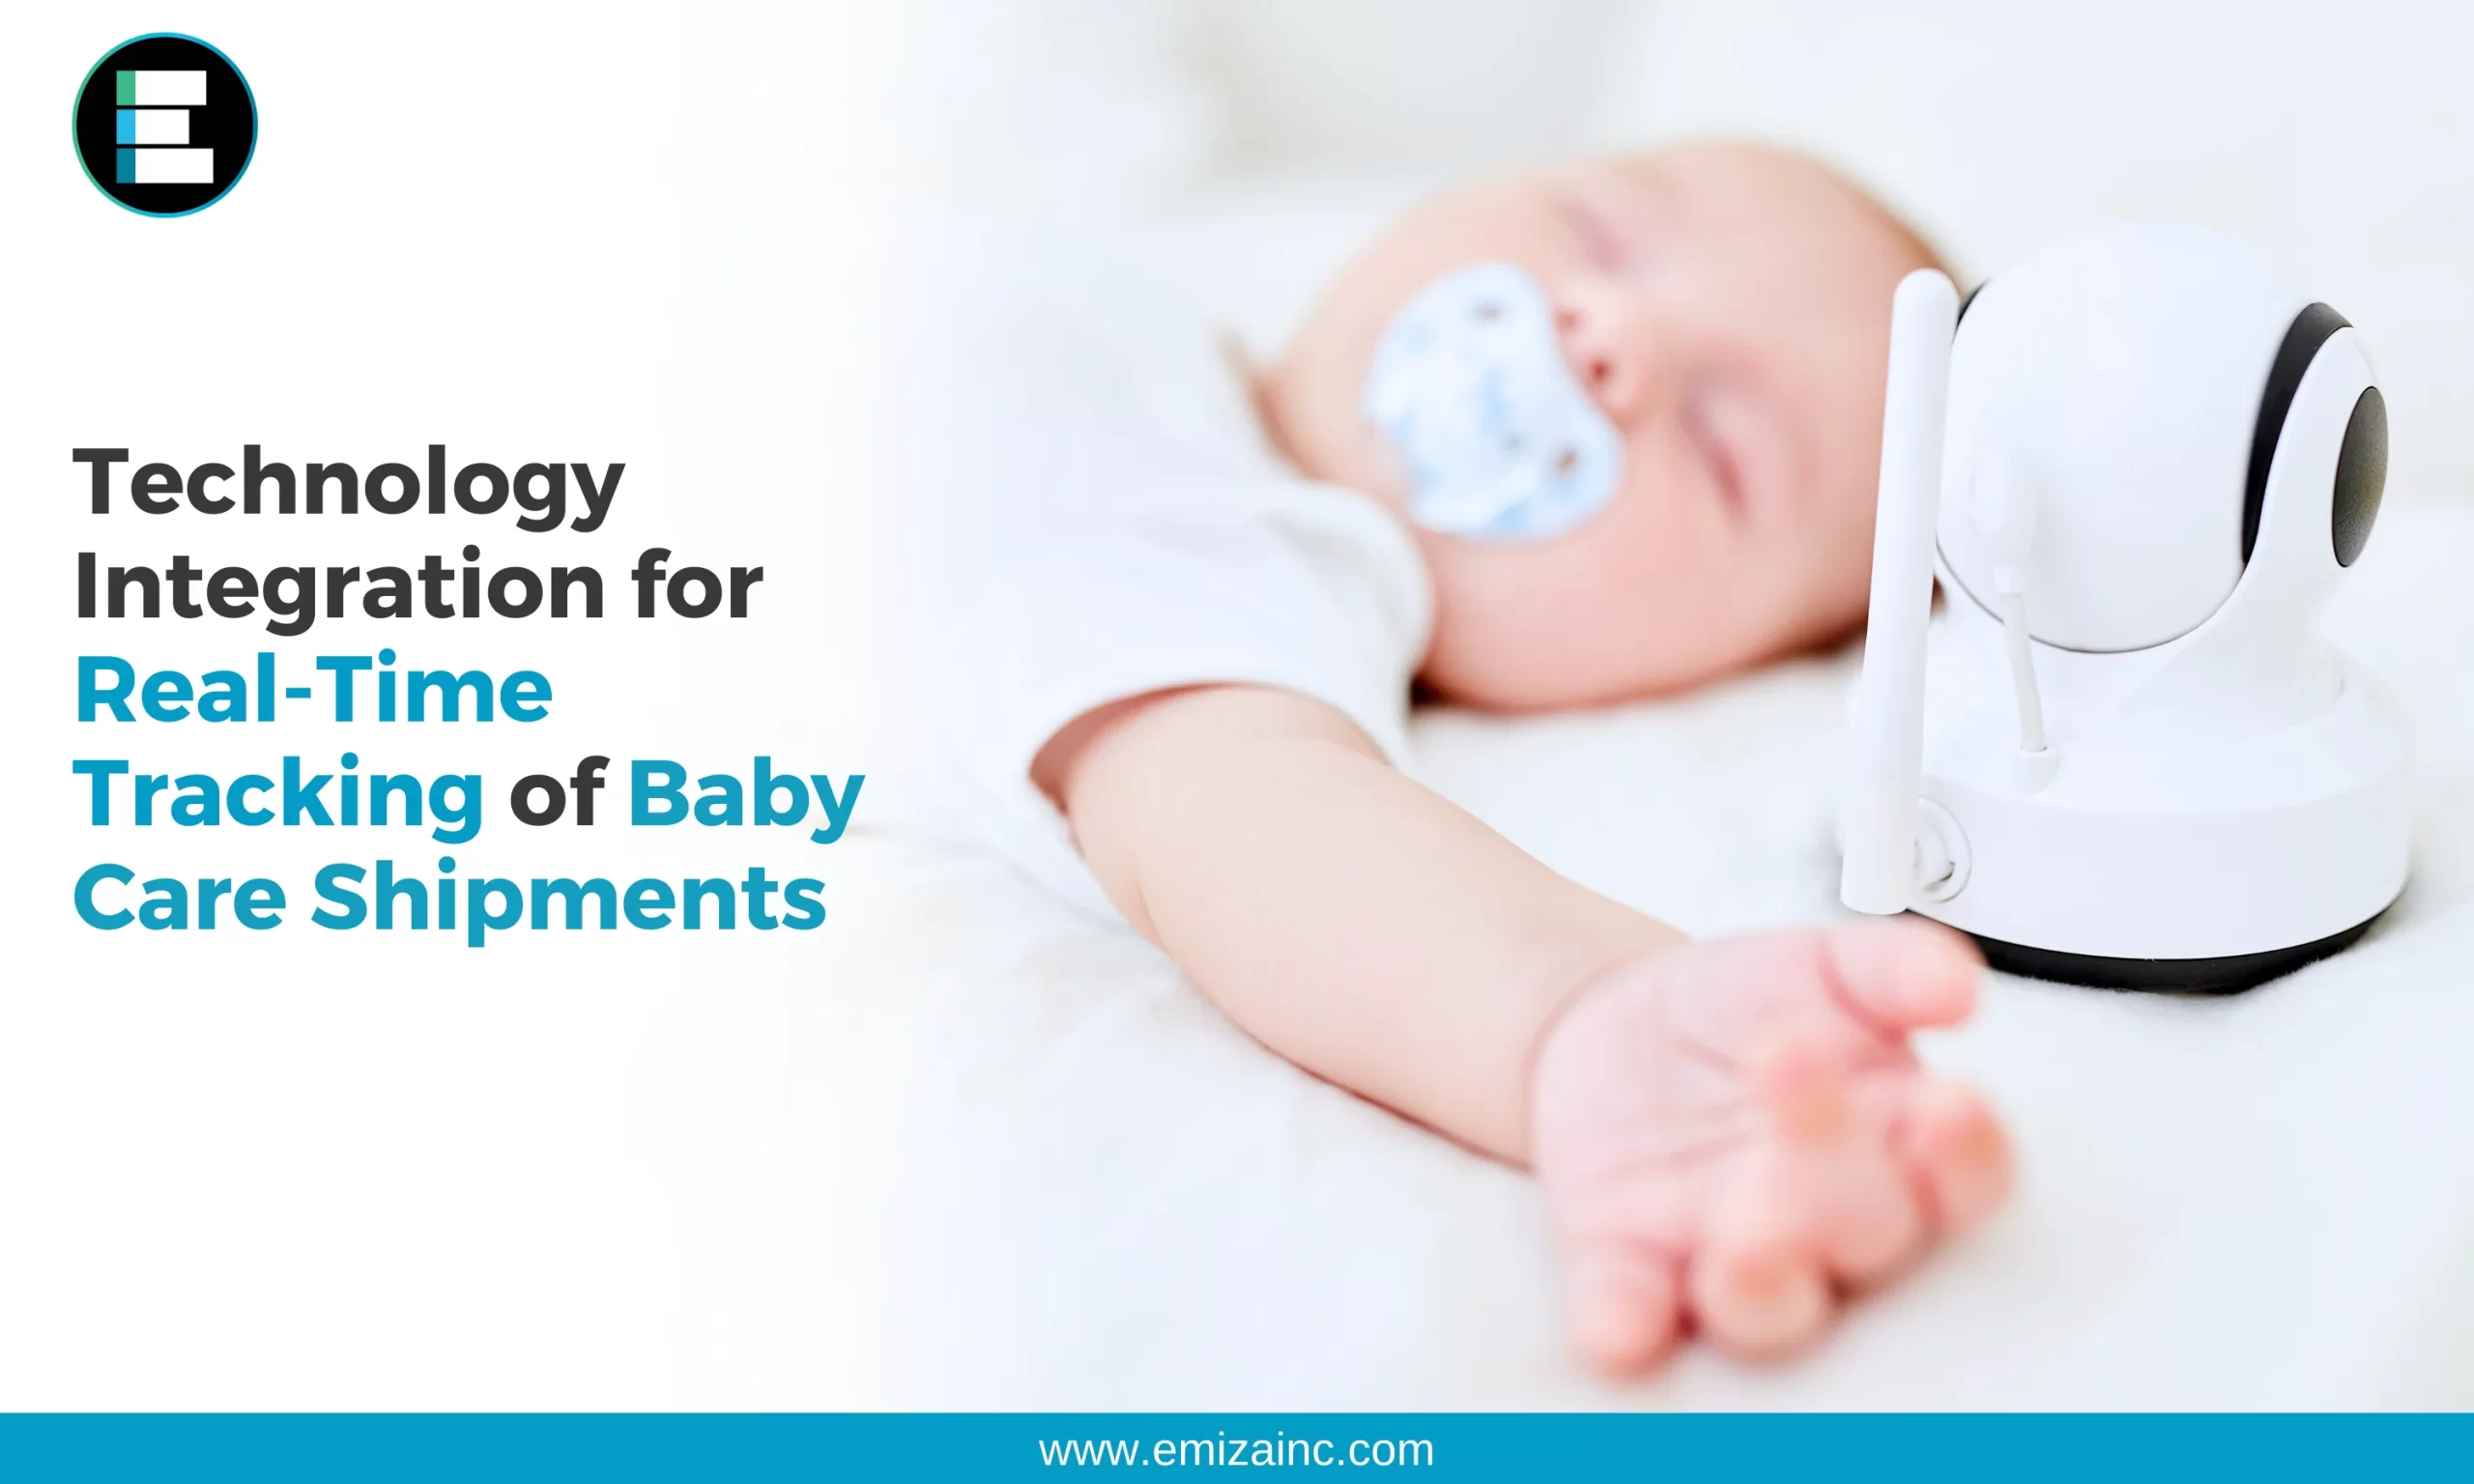 Technology Integration for Real-Time Tracking of Baby Care Shipments